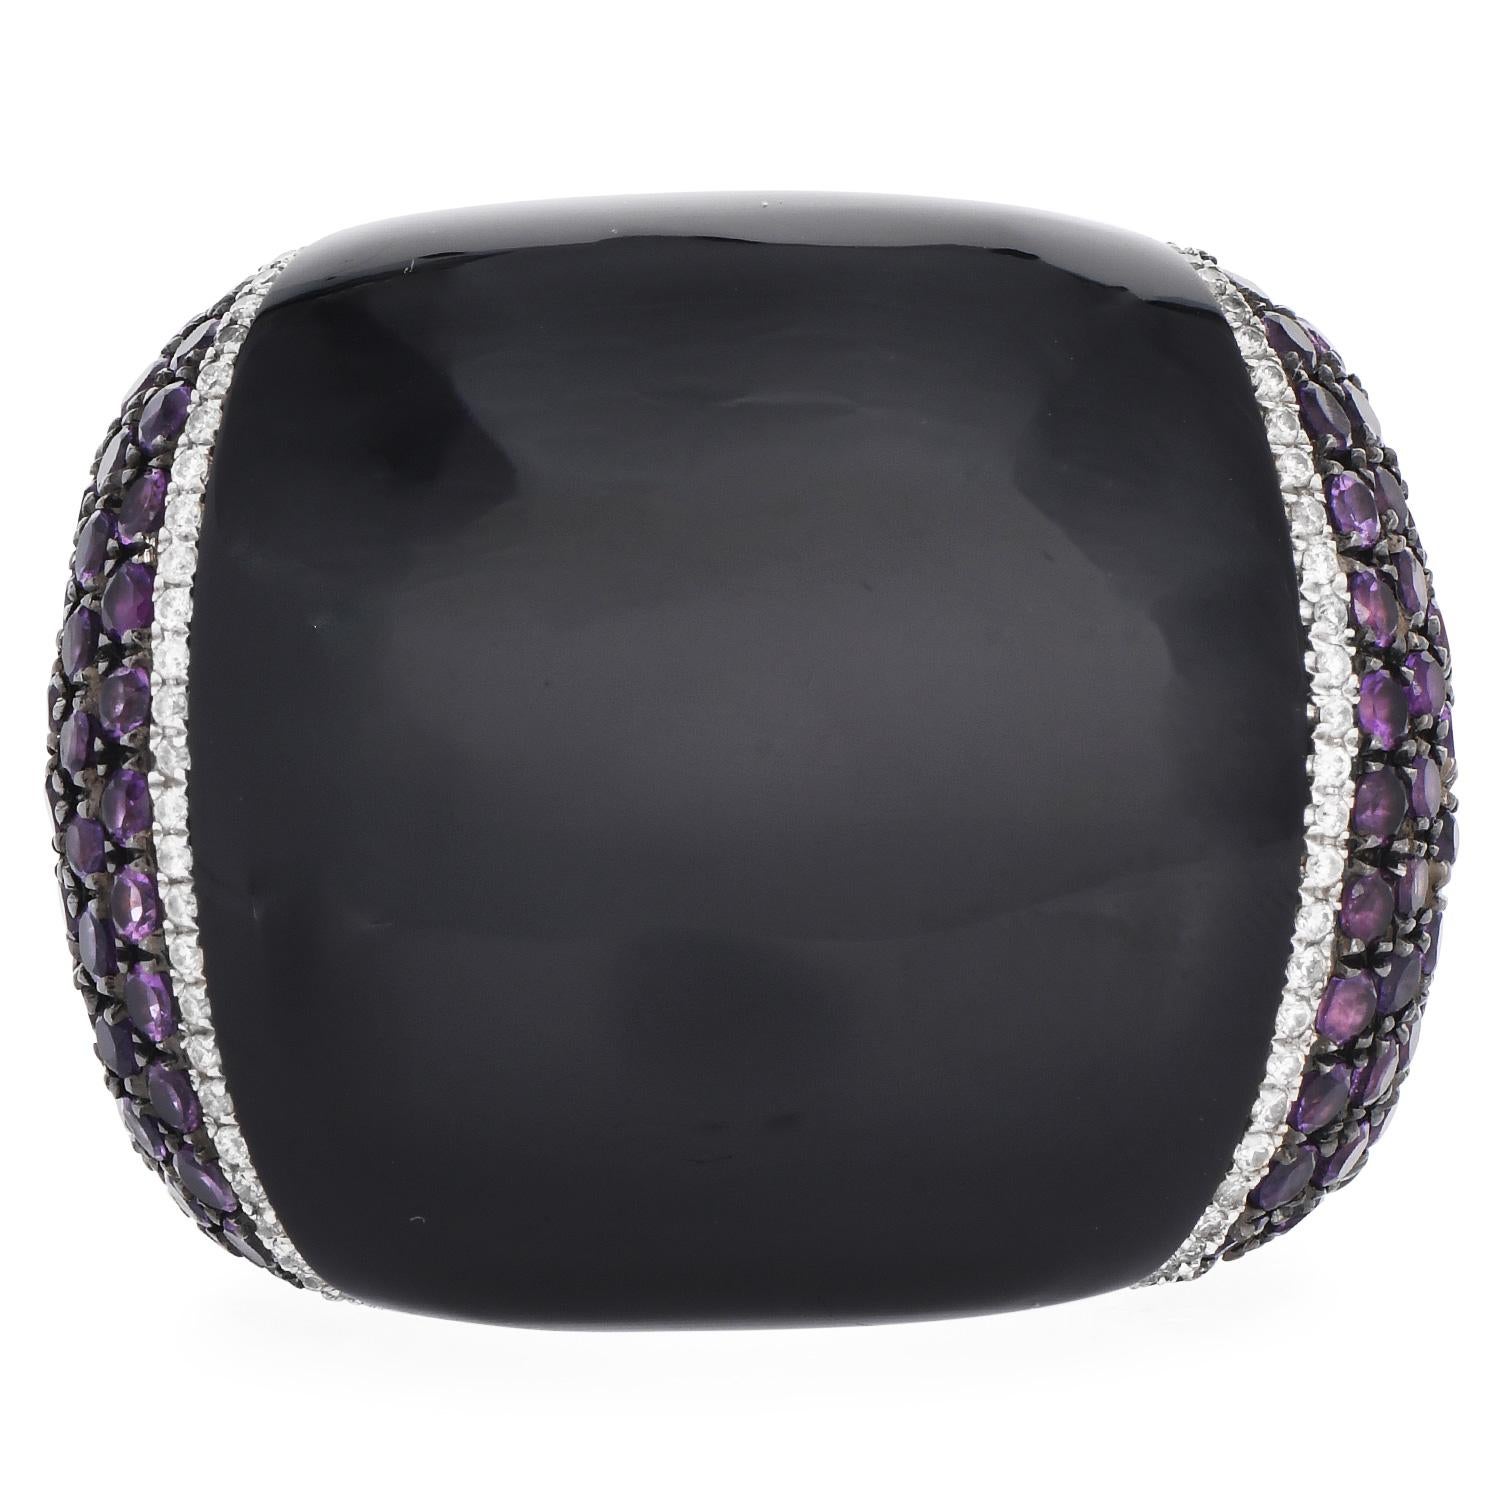 This  pristine high quality Designer Cluster Diamond , Amethyst and onyx cocktail ring is made in 18k white gold.

Prominently showcasing an onyx Center accompanied with 0.50 round cut diamonds, G-H color, and VS clarity and Round Amethyst, weighing